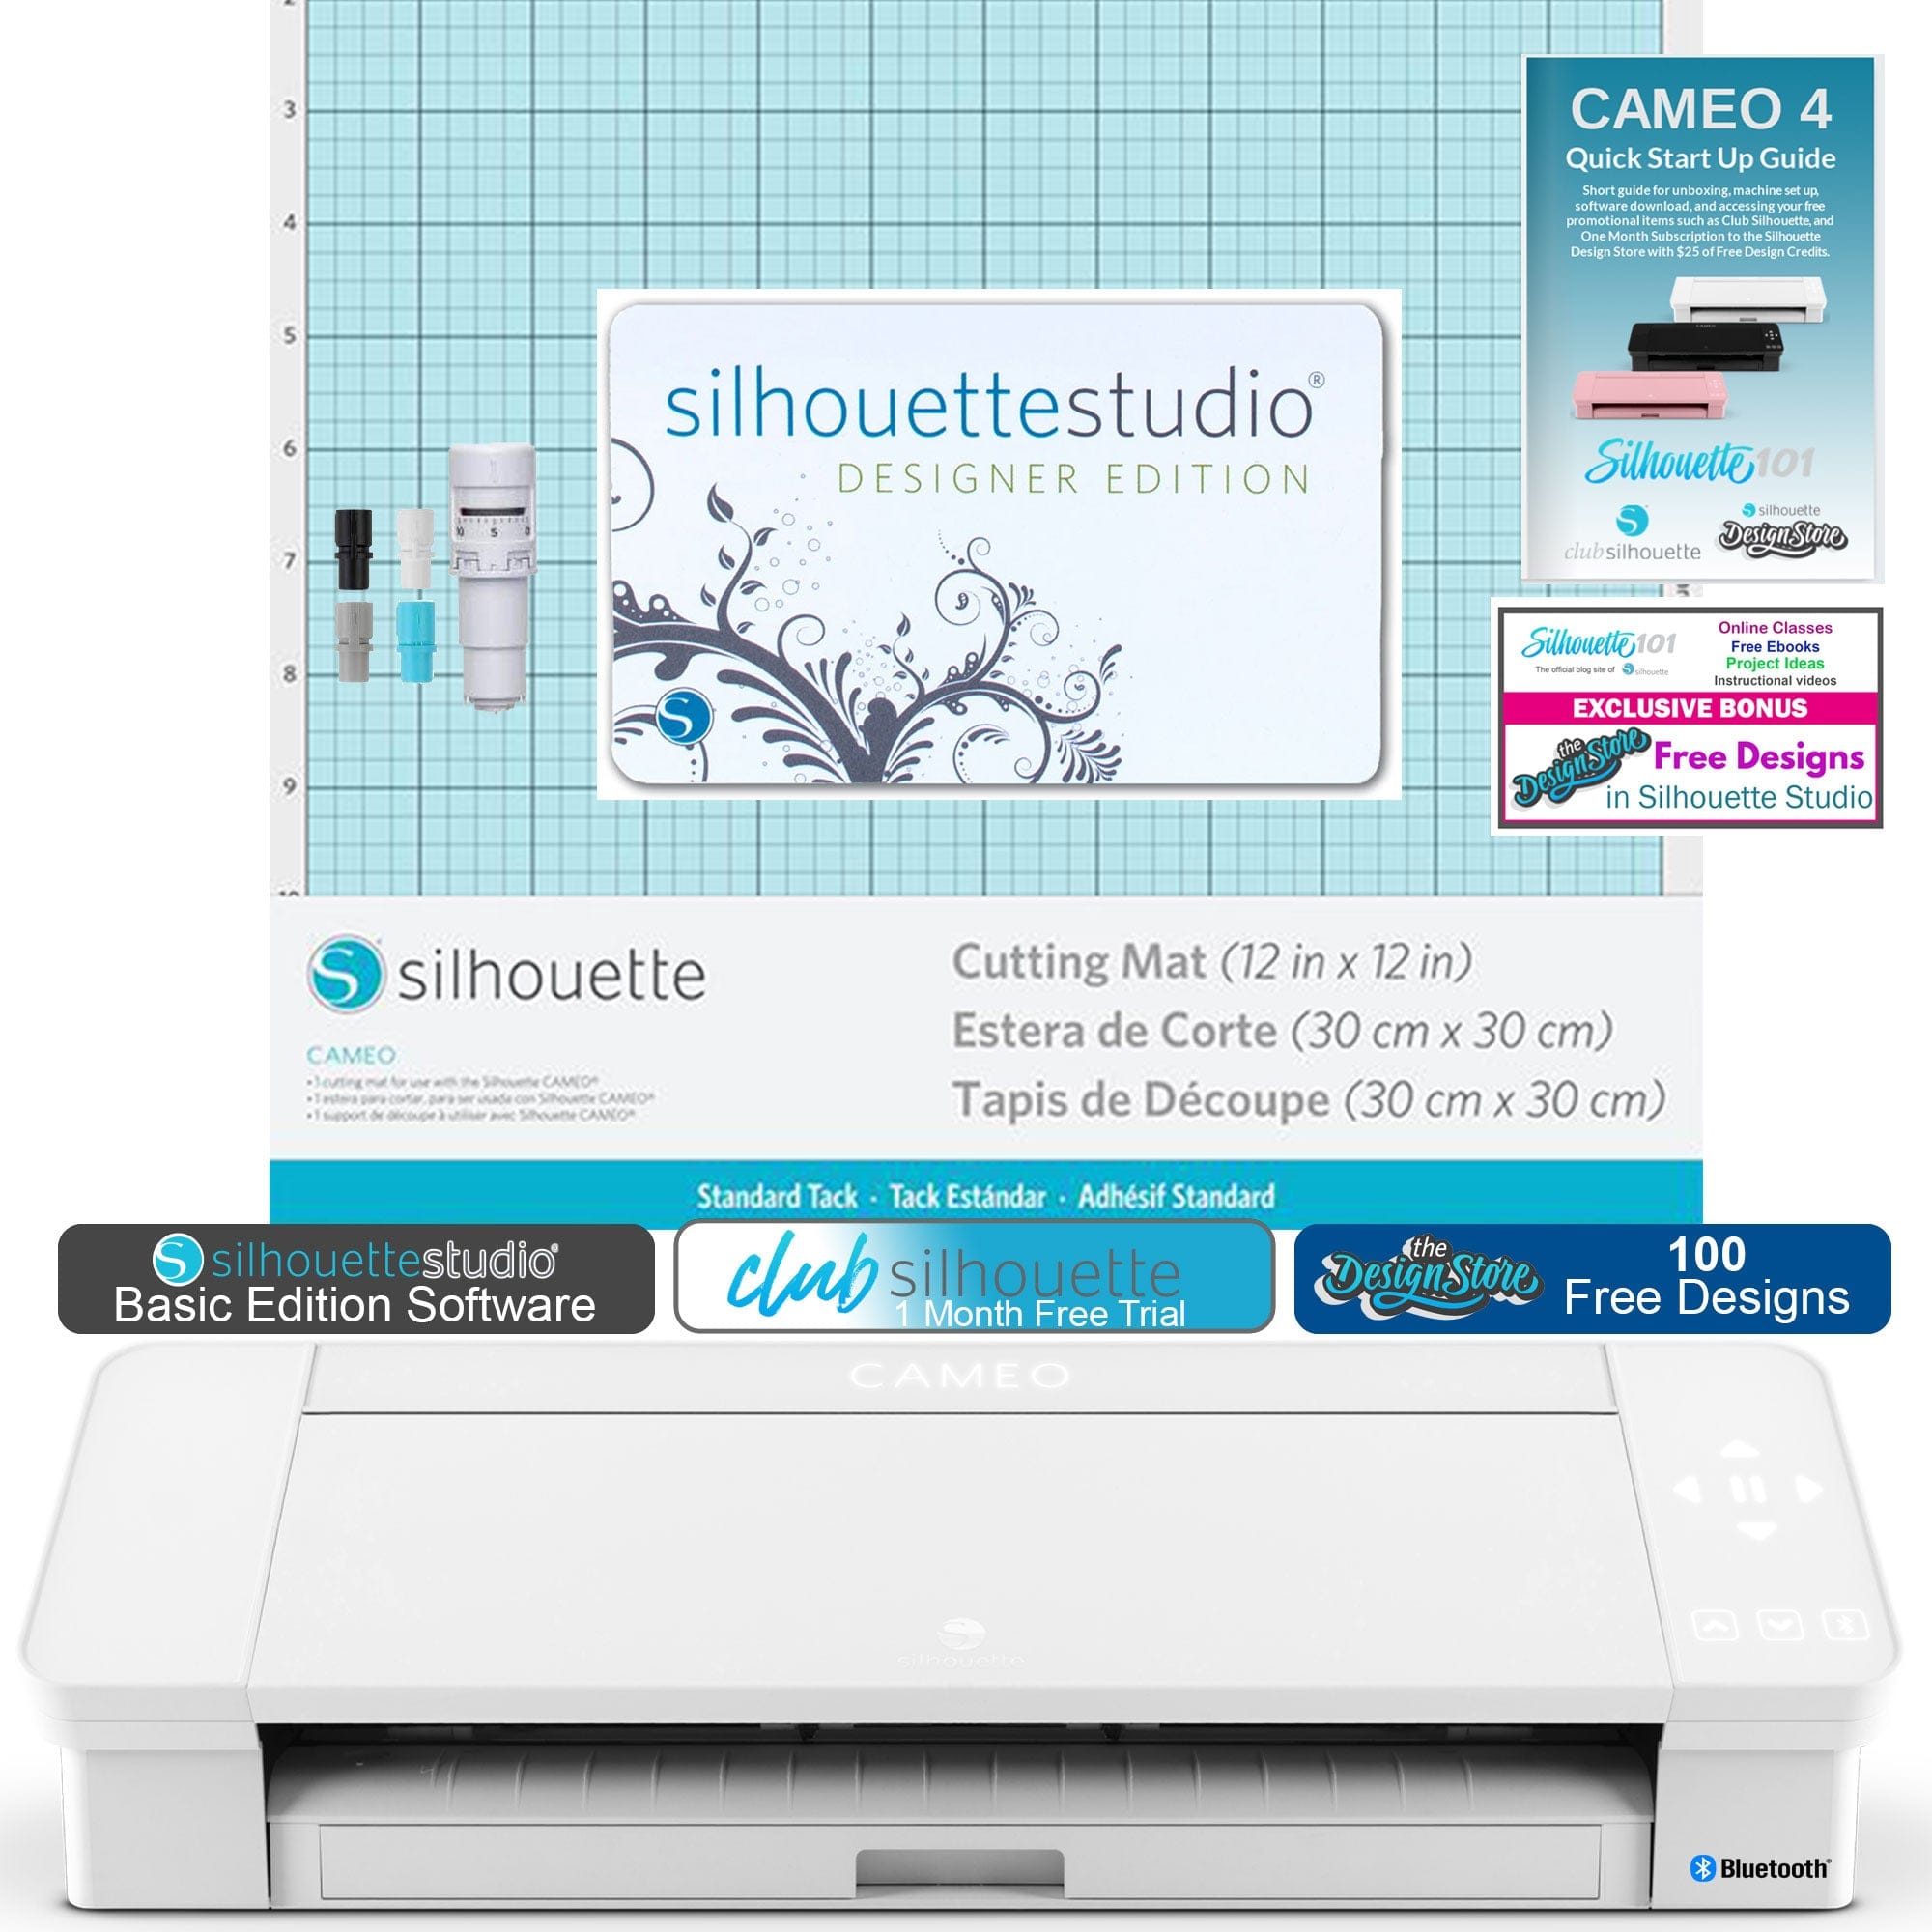 Cameo 4 Setup: Unboxing your new Silhouette machine » Smart Silhouette